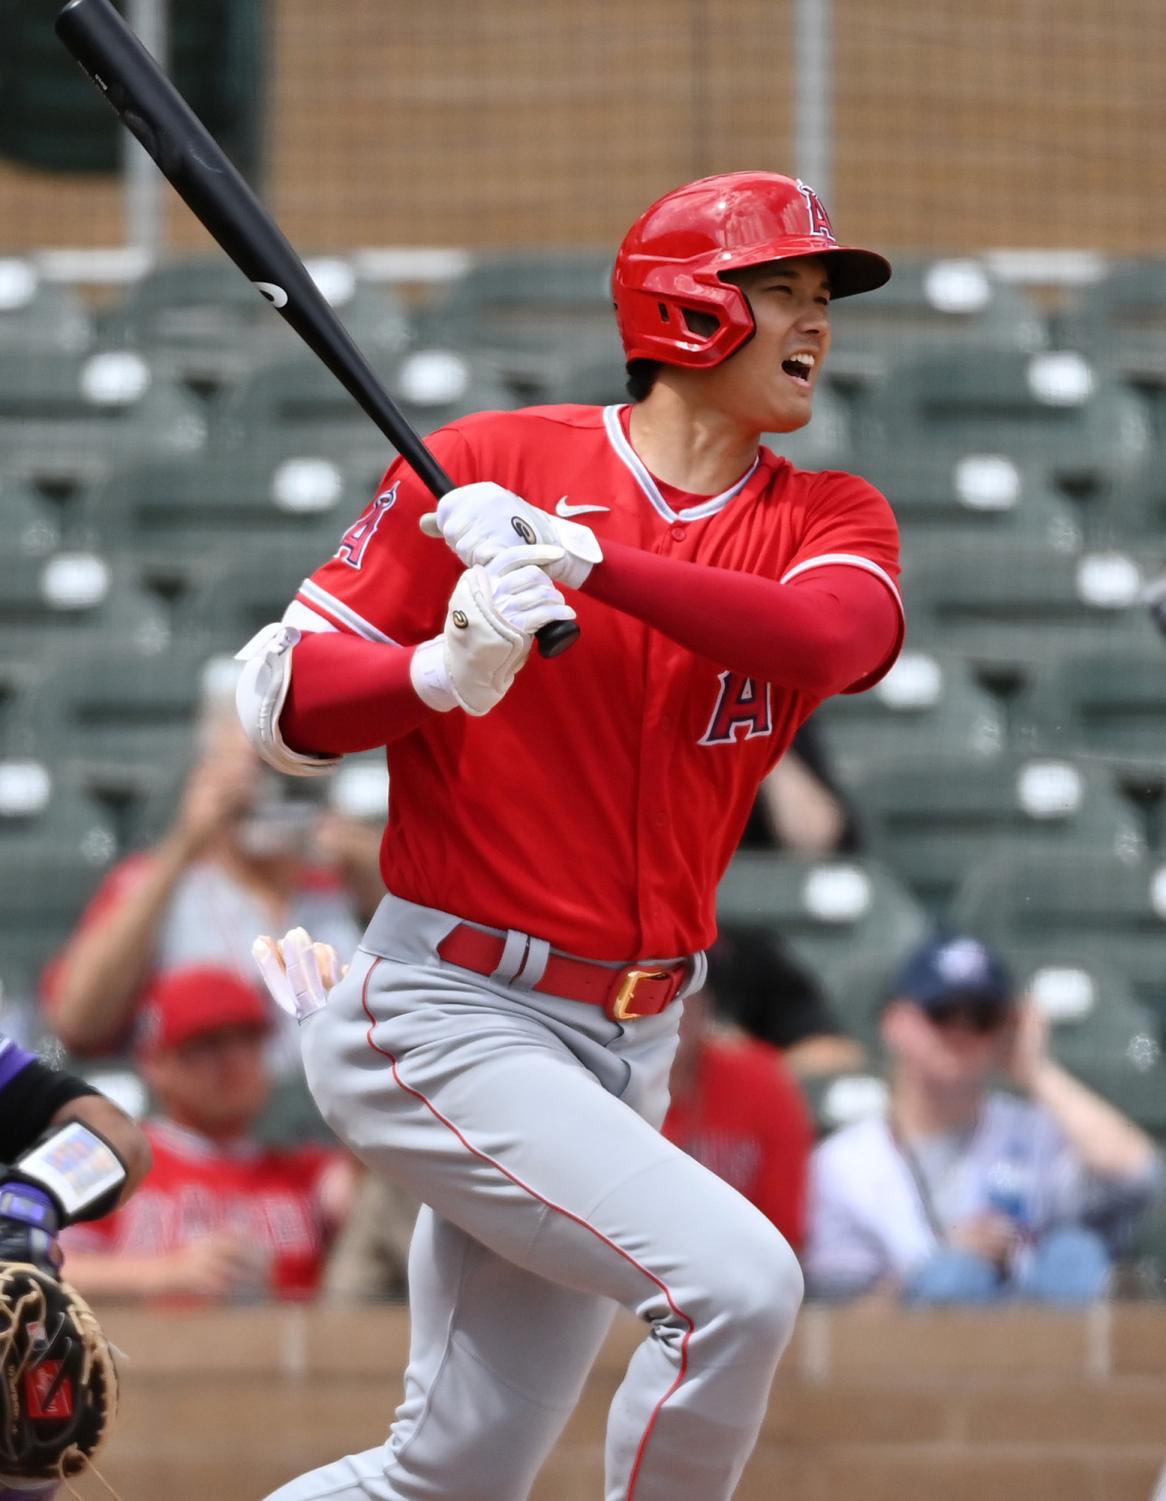 Opinion%3A+Shohei+Ohtani+is+leading+the+charge+of+a+new+kind+of+baseball